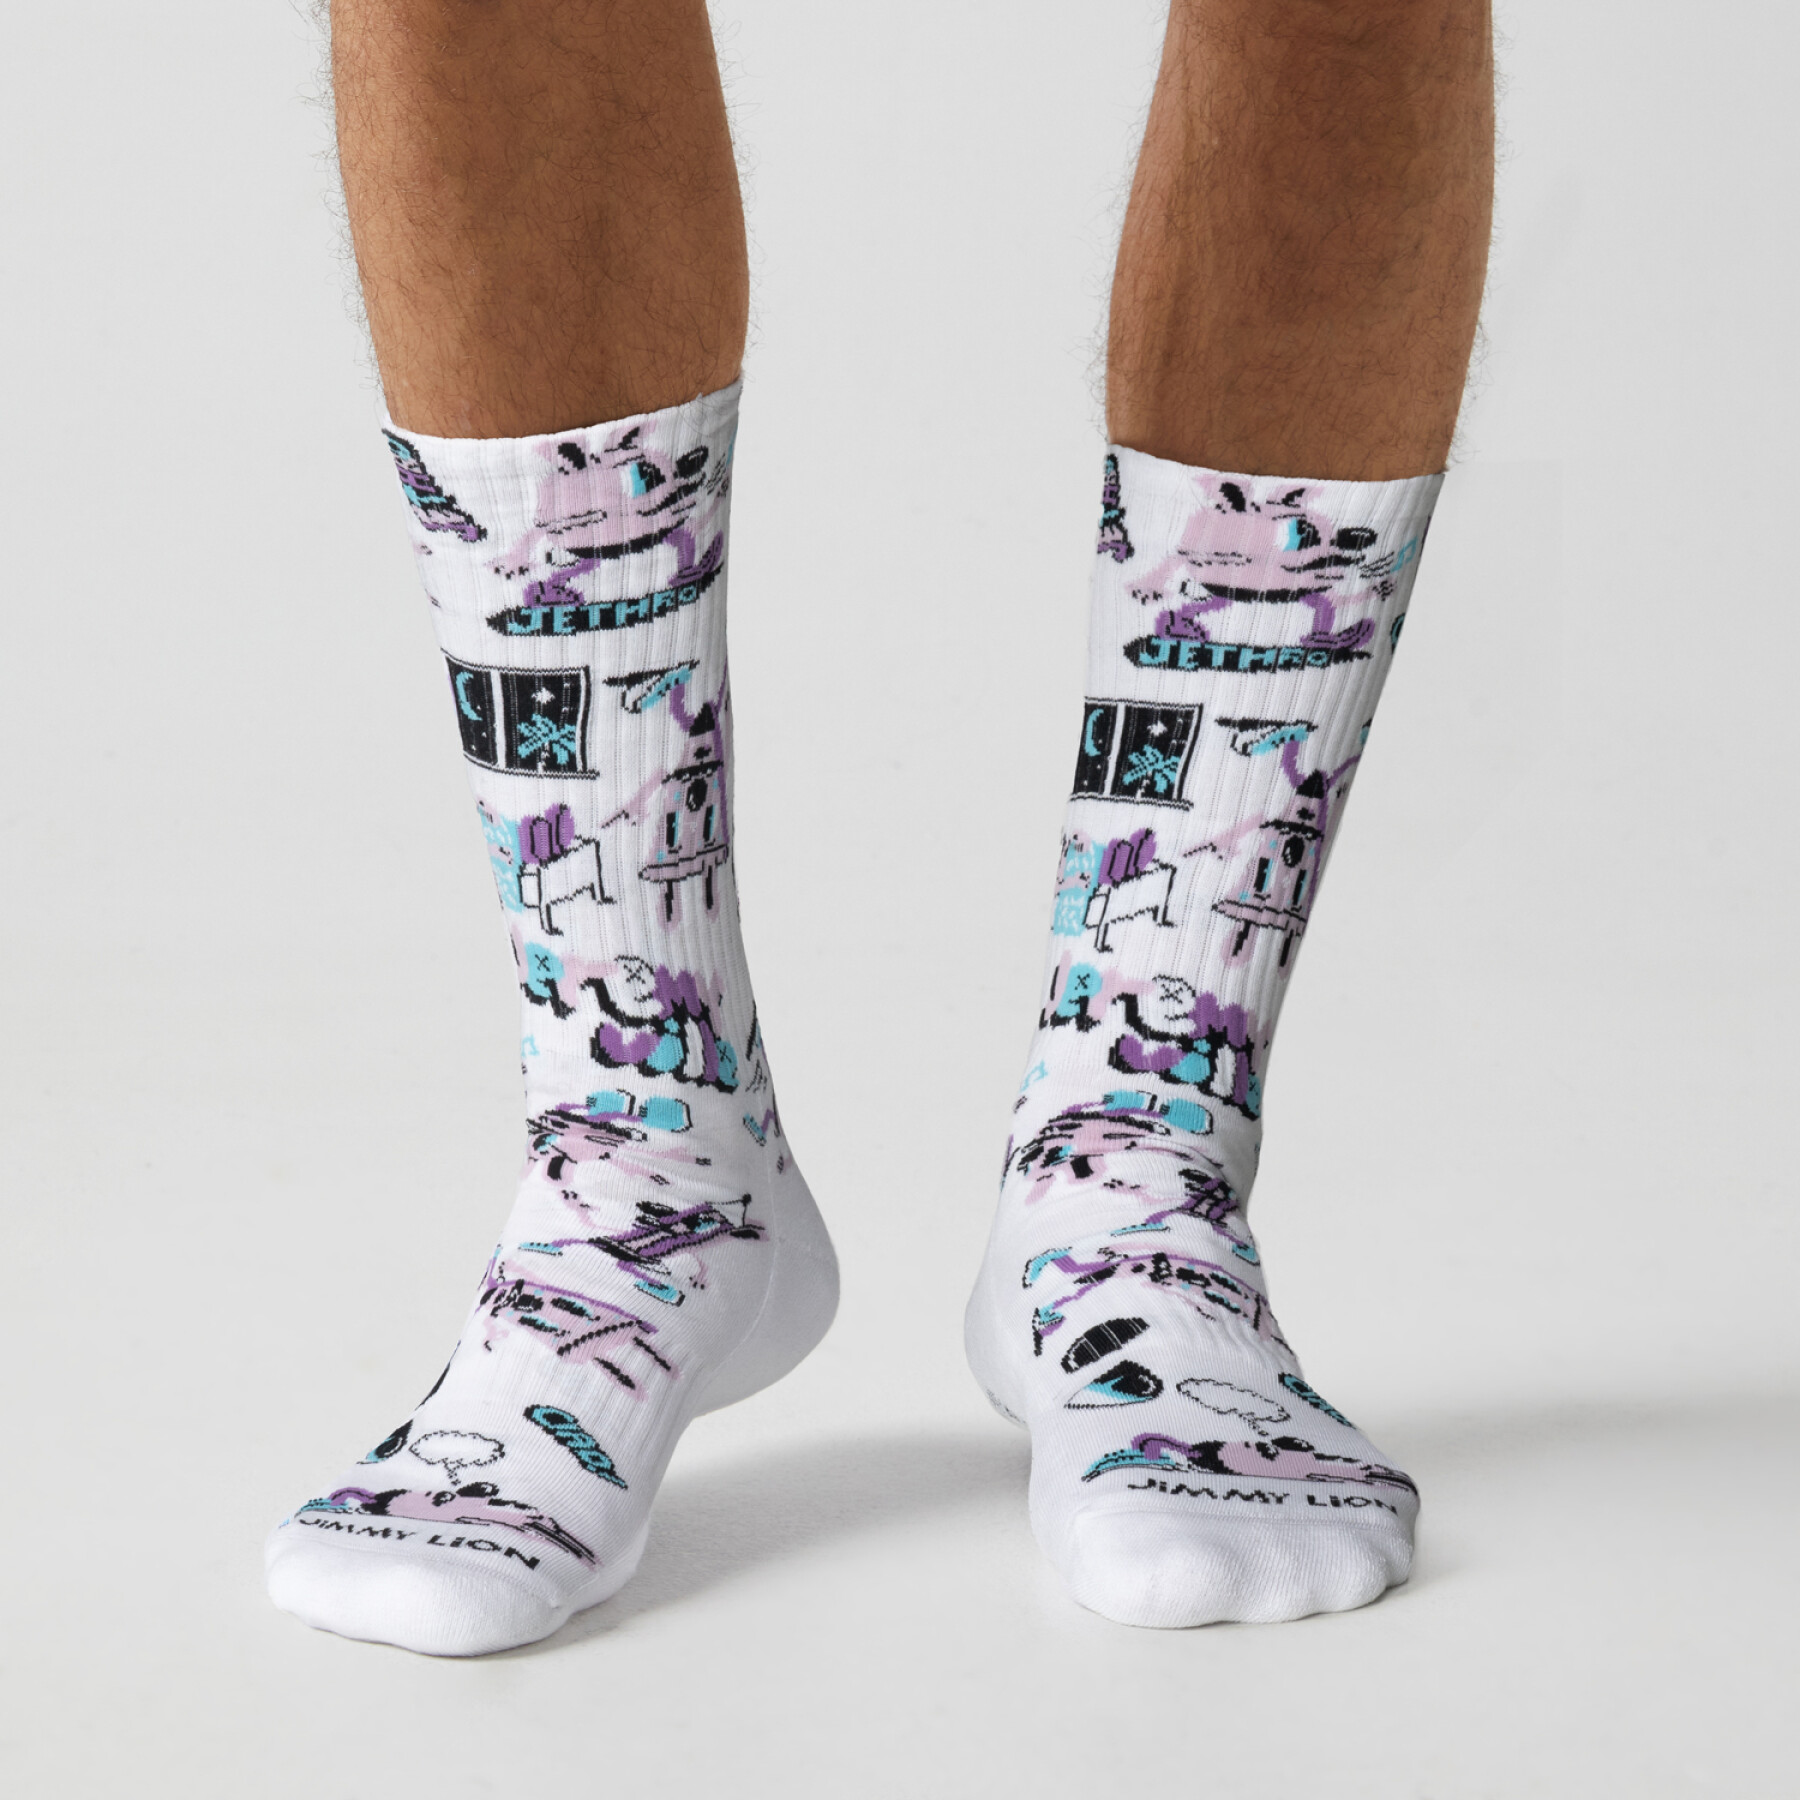 Chaussettes Jimmy Lion Athletic - Jethro Pattern